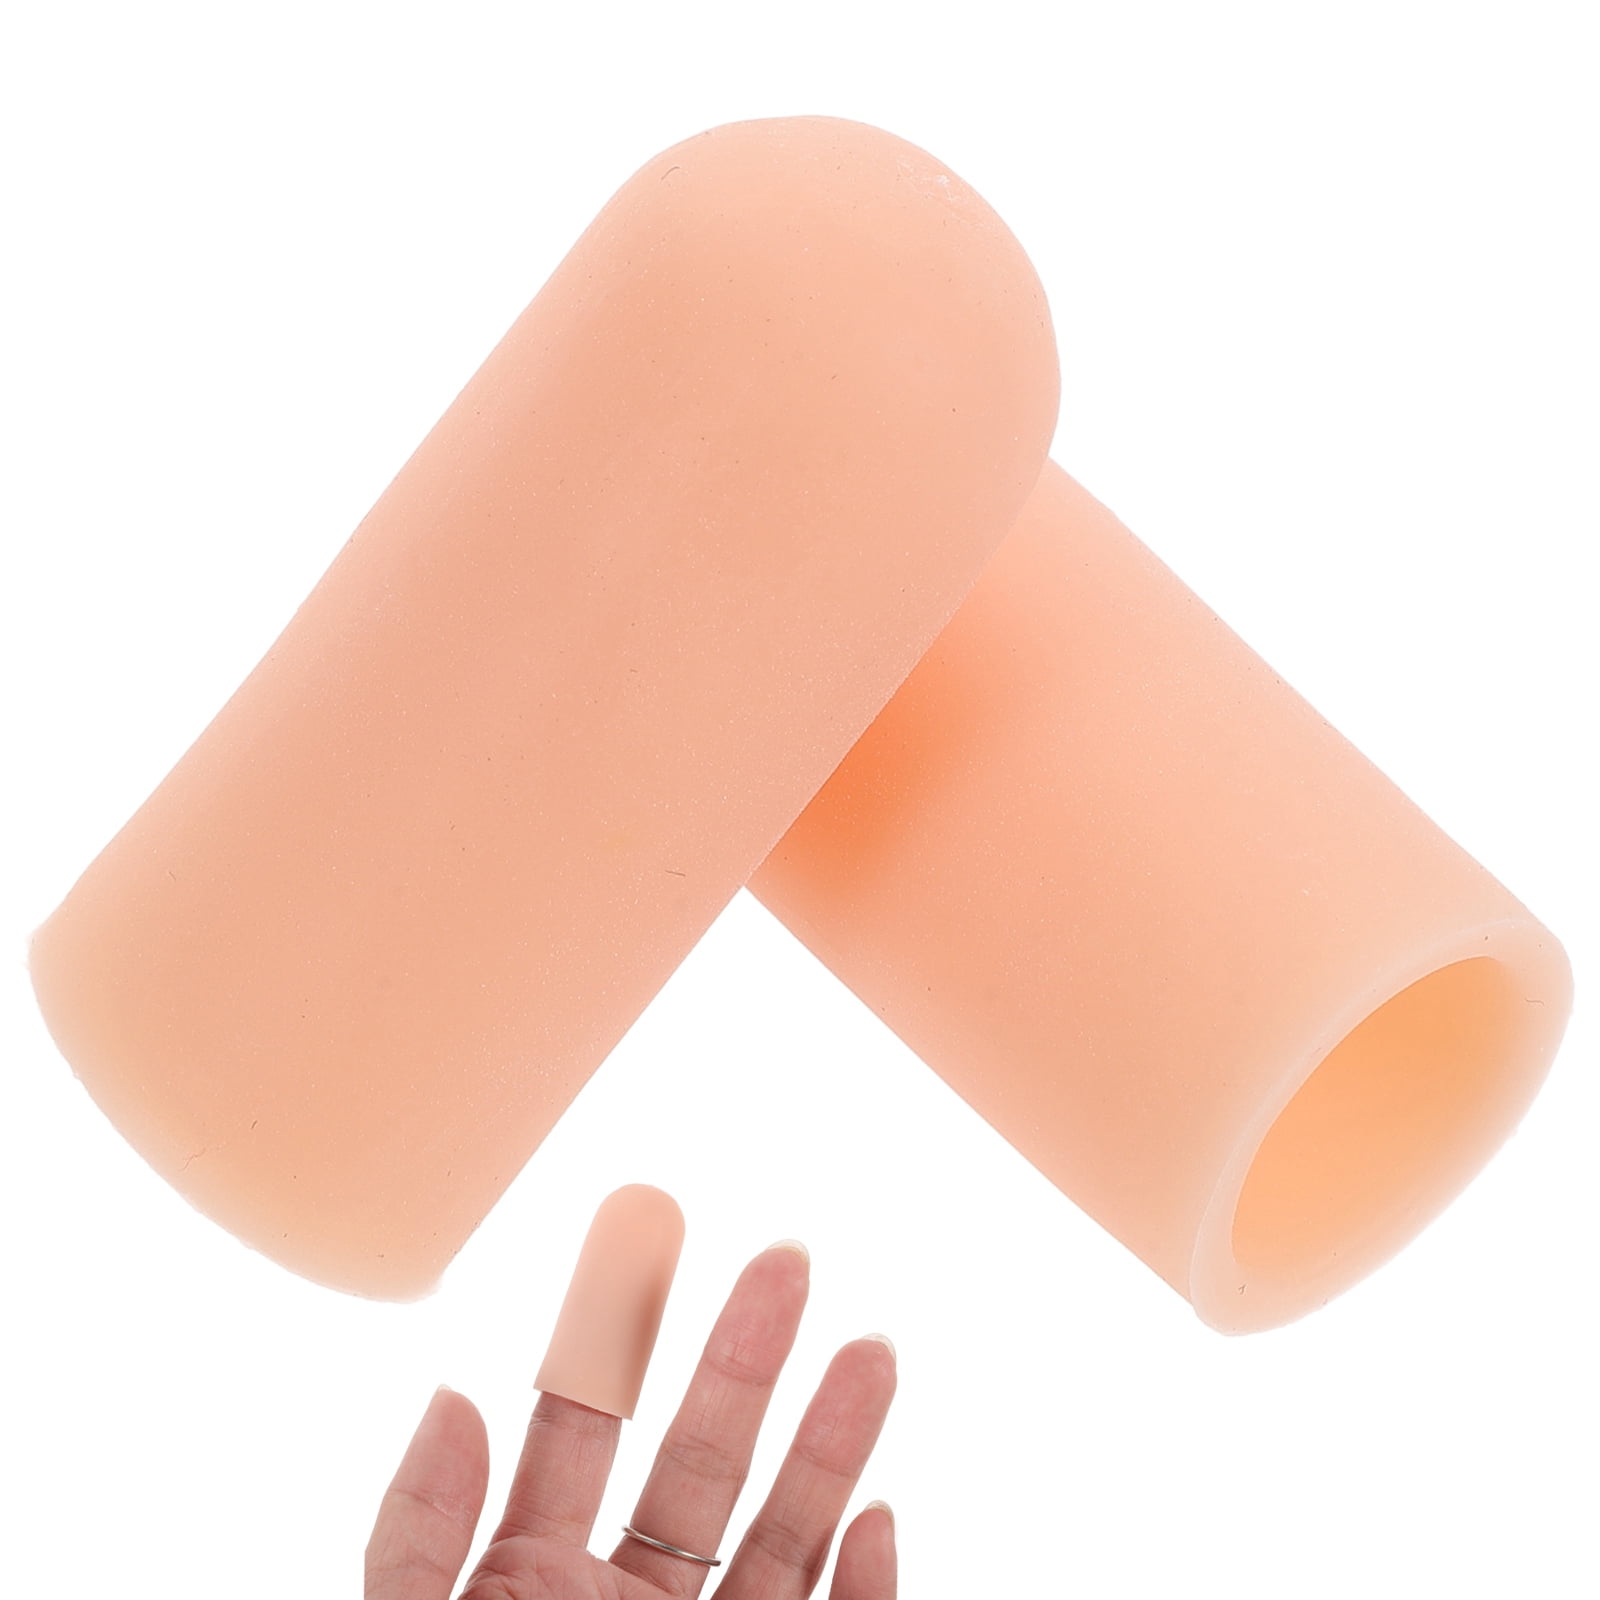 TGuard AeroFinger - Finger Guard to Stop Finger-Sucking and to Promote Oral Health - Effective Solution to Stop Babies, Toddlers, and Kids from